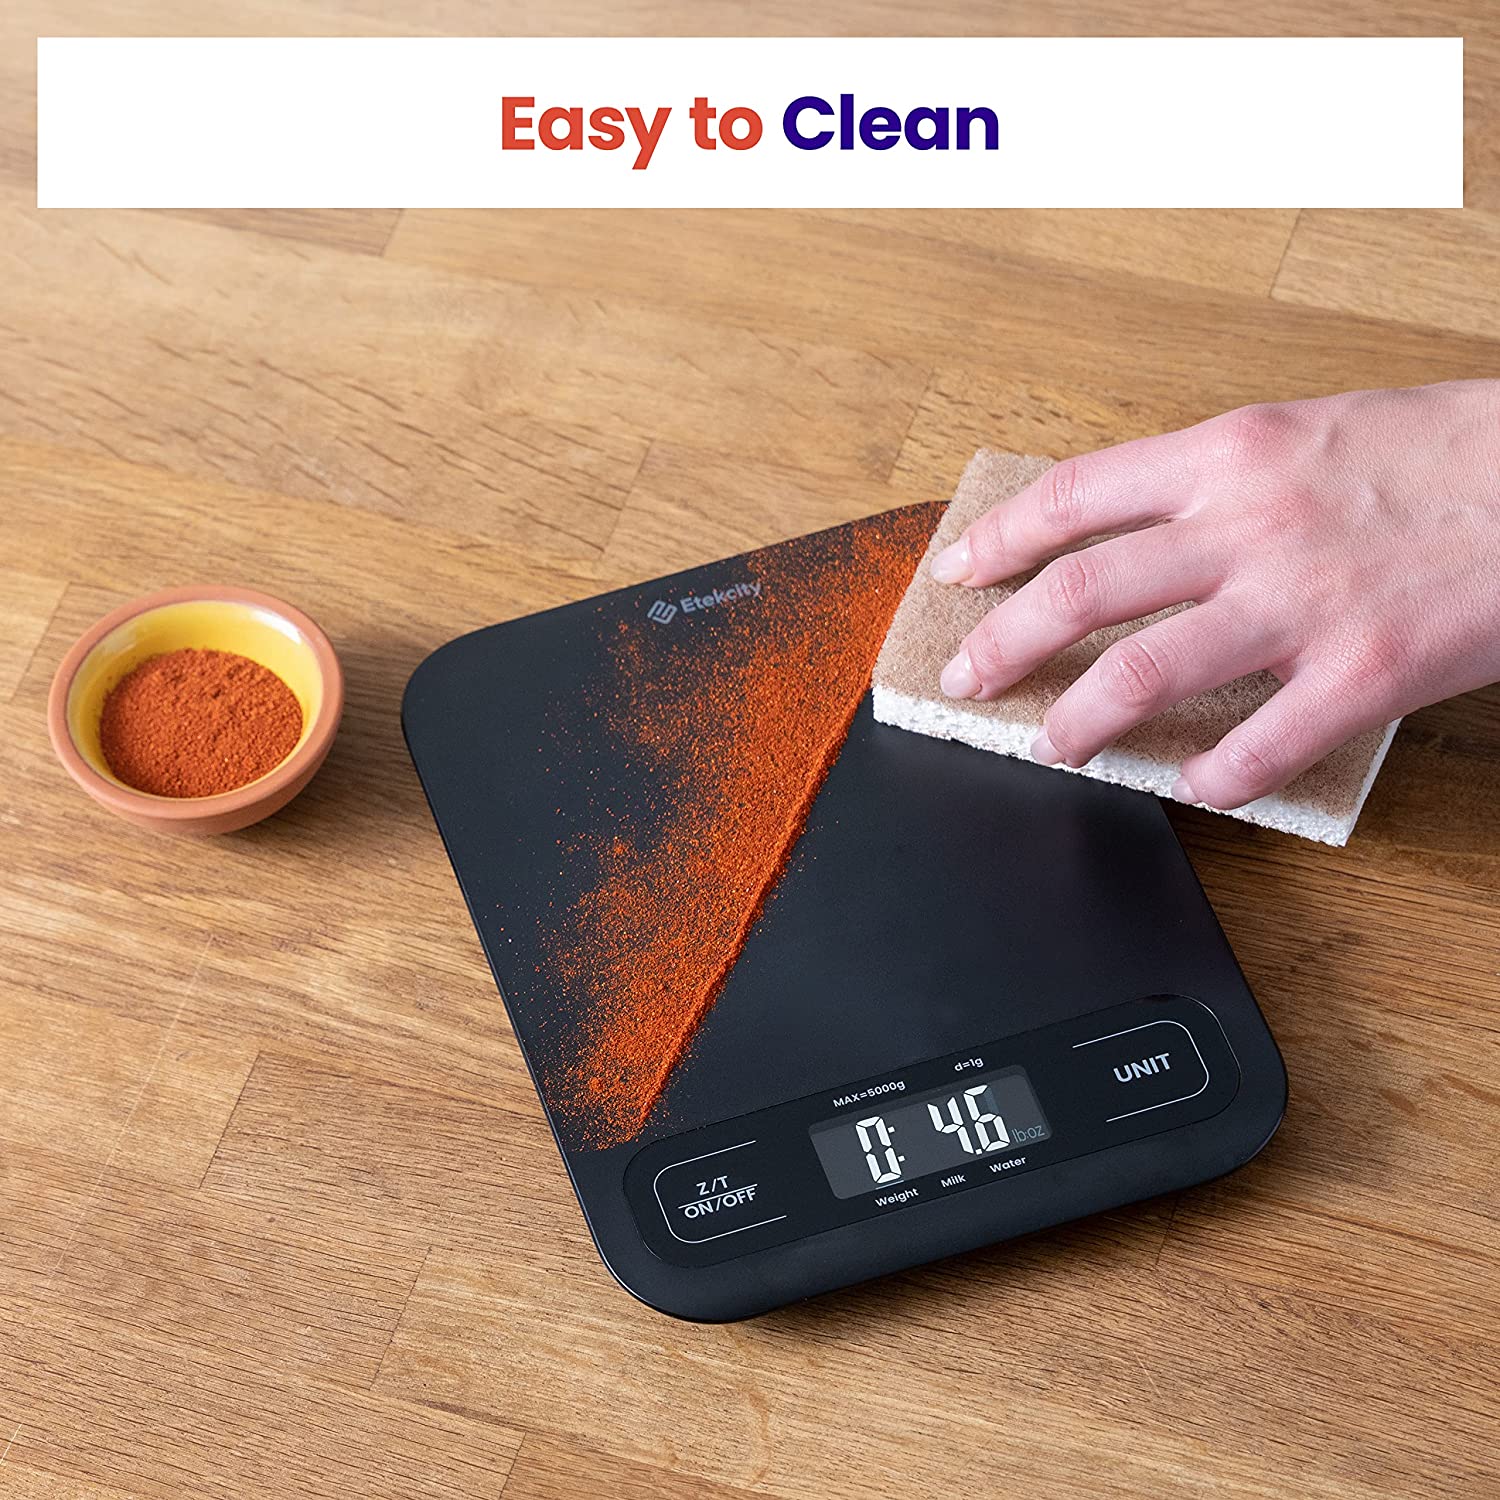 Etekcity Food Kitchen Scale Digital Cooking Baking Meal Prep Dieting Weight Loss